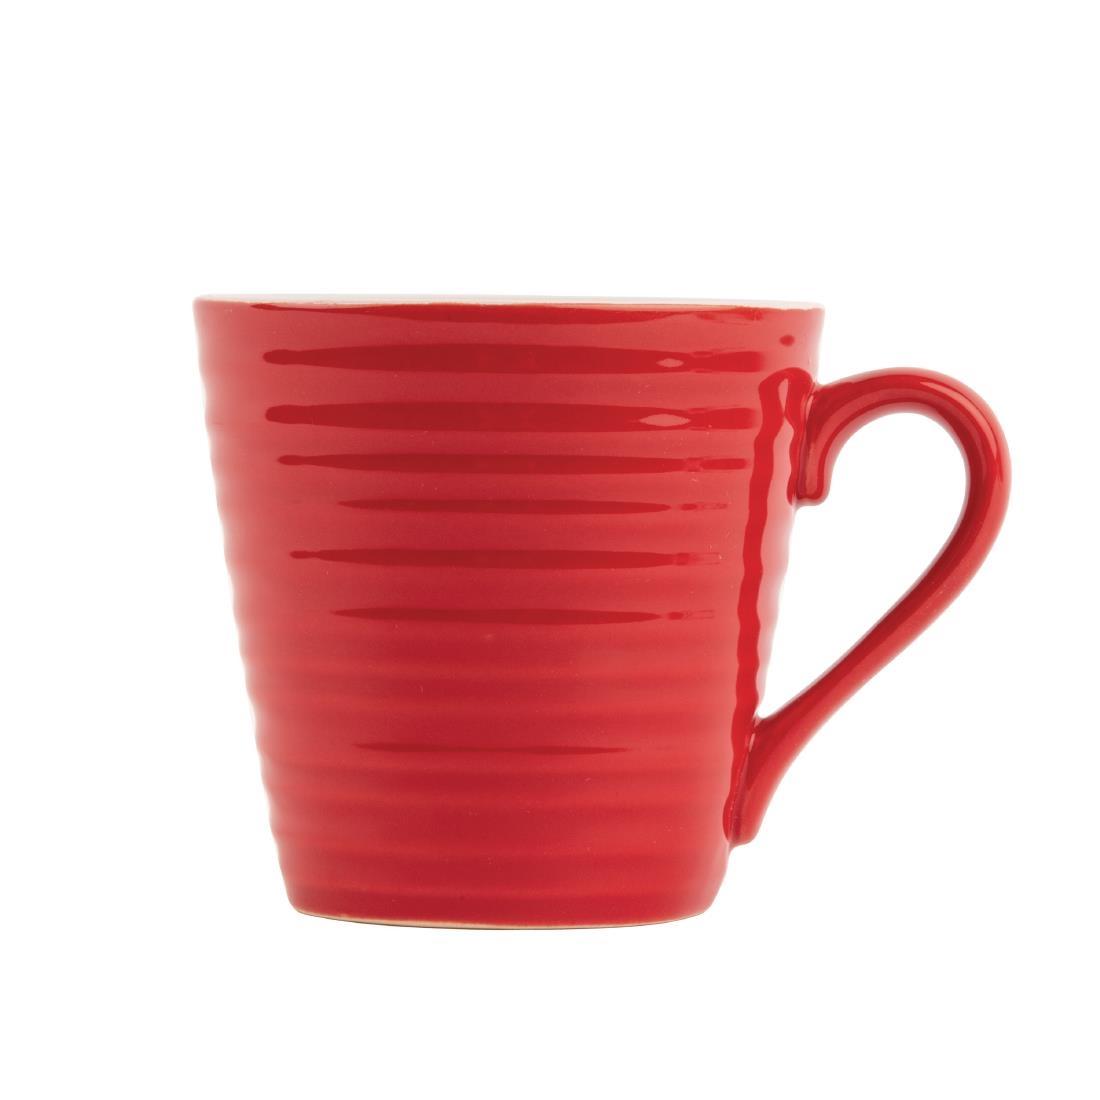 Olympia Café Aroma Mugs Red 340ml (Pack of 6) - DH632  - 2